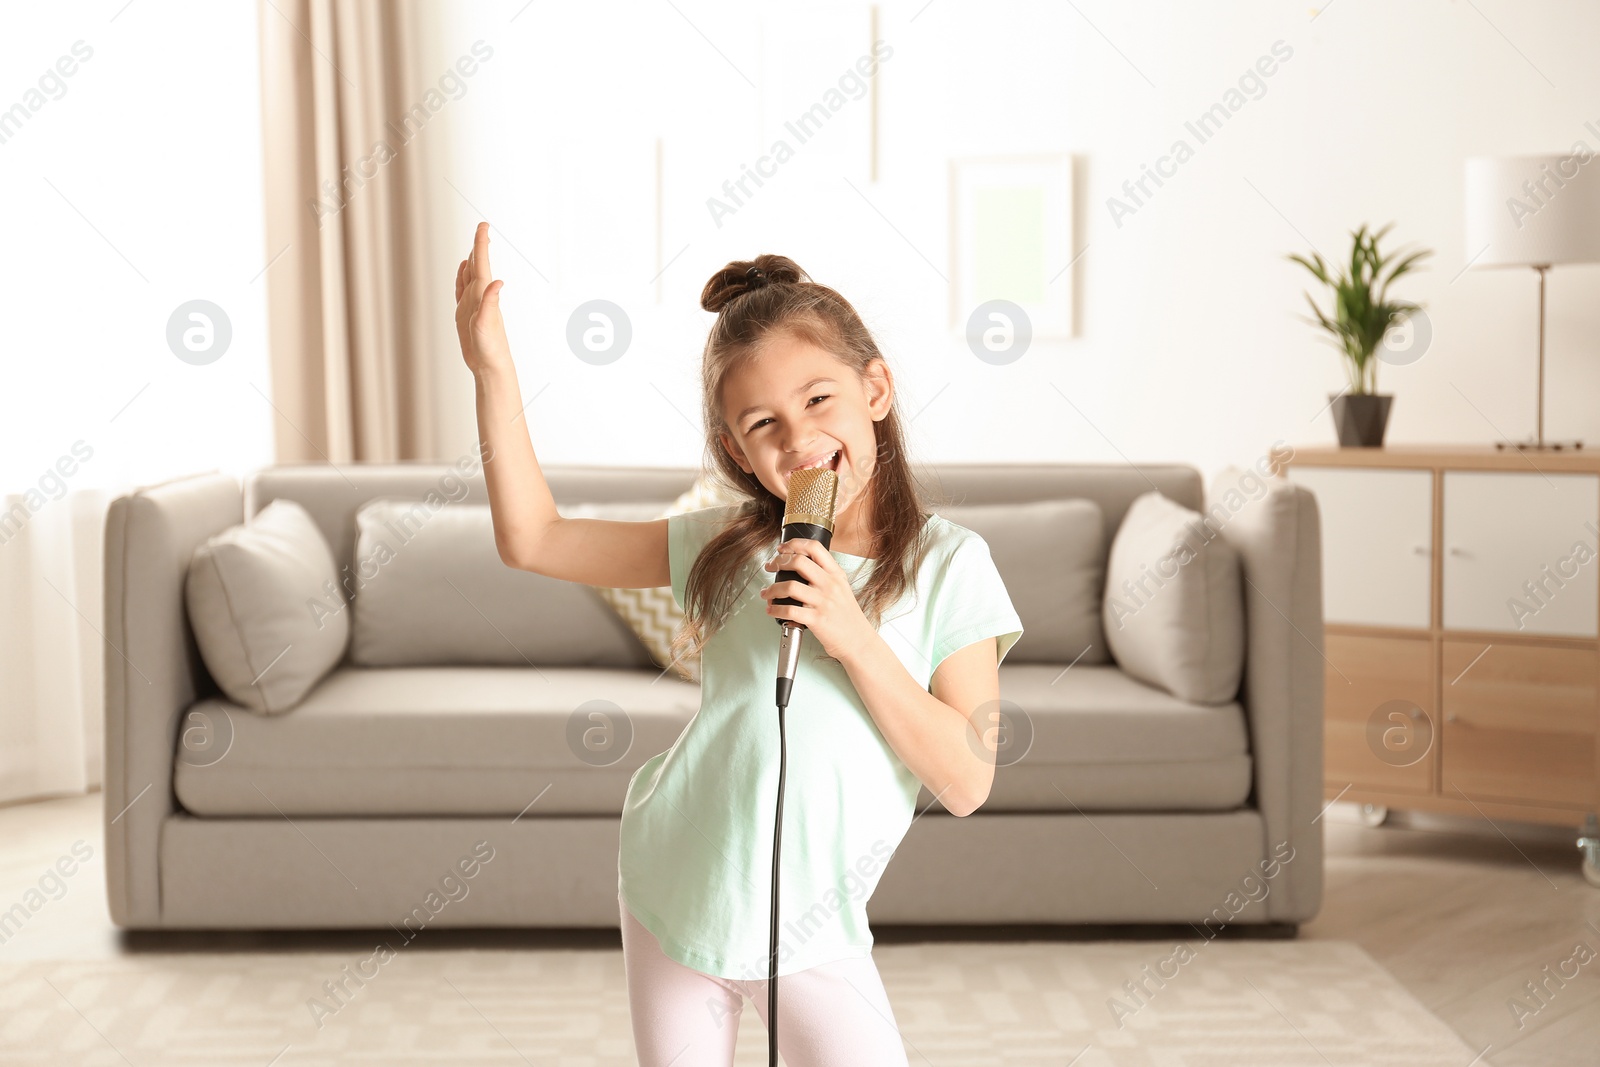 Photo of Cute funny girl with microphone in living room